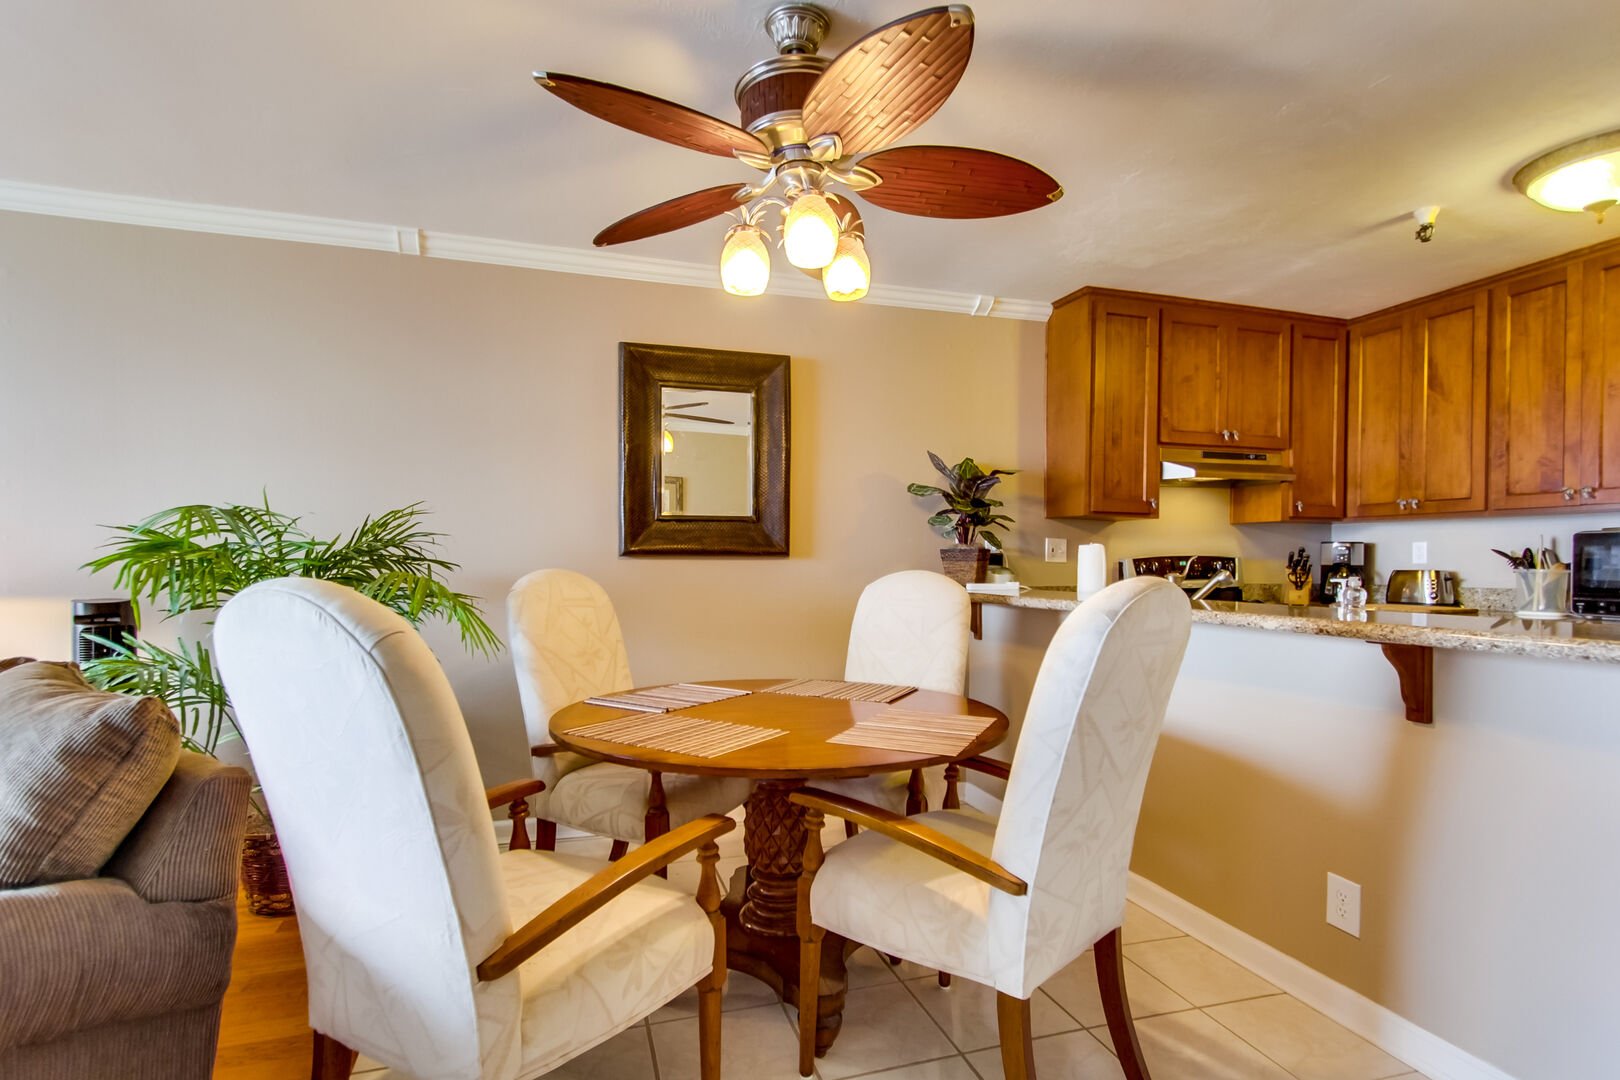 Dining seating for 4 with ceiling fan and over head lighting above.